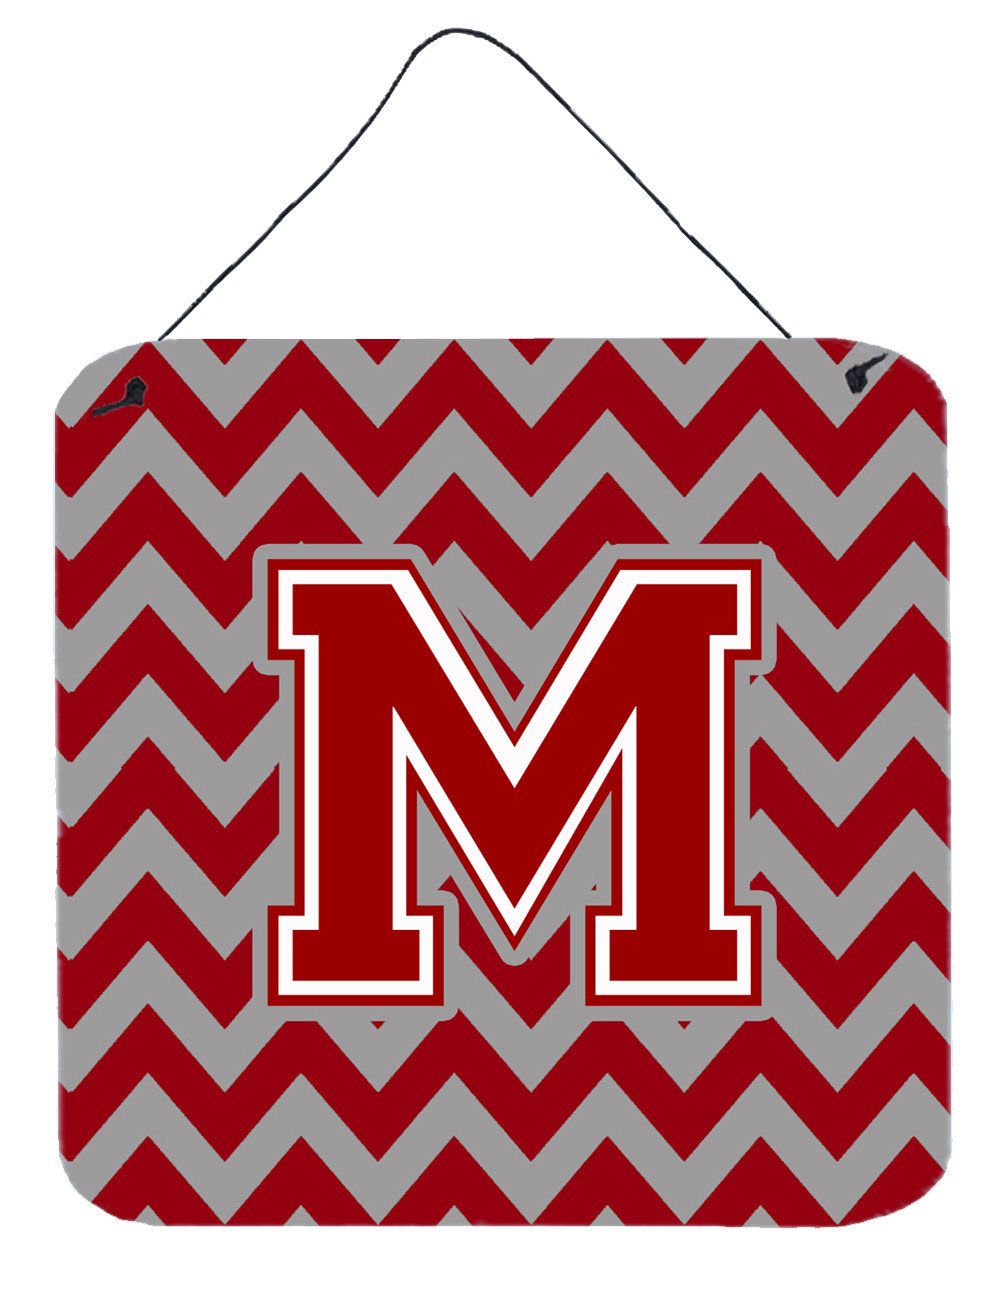 Letter M Chevron Maroon and White Wall or Door Hanging Prints CJ1049-MDS66 by Caroline's Treasures